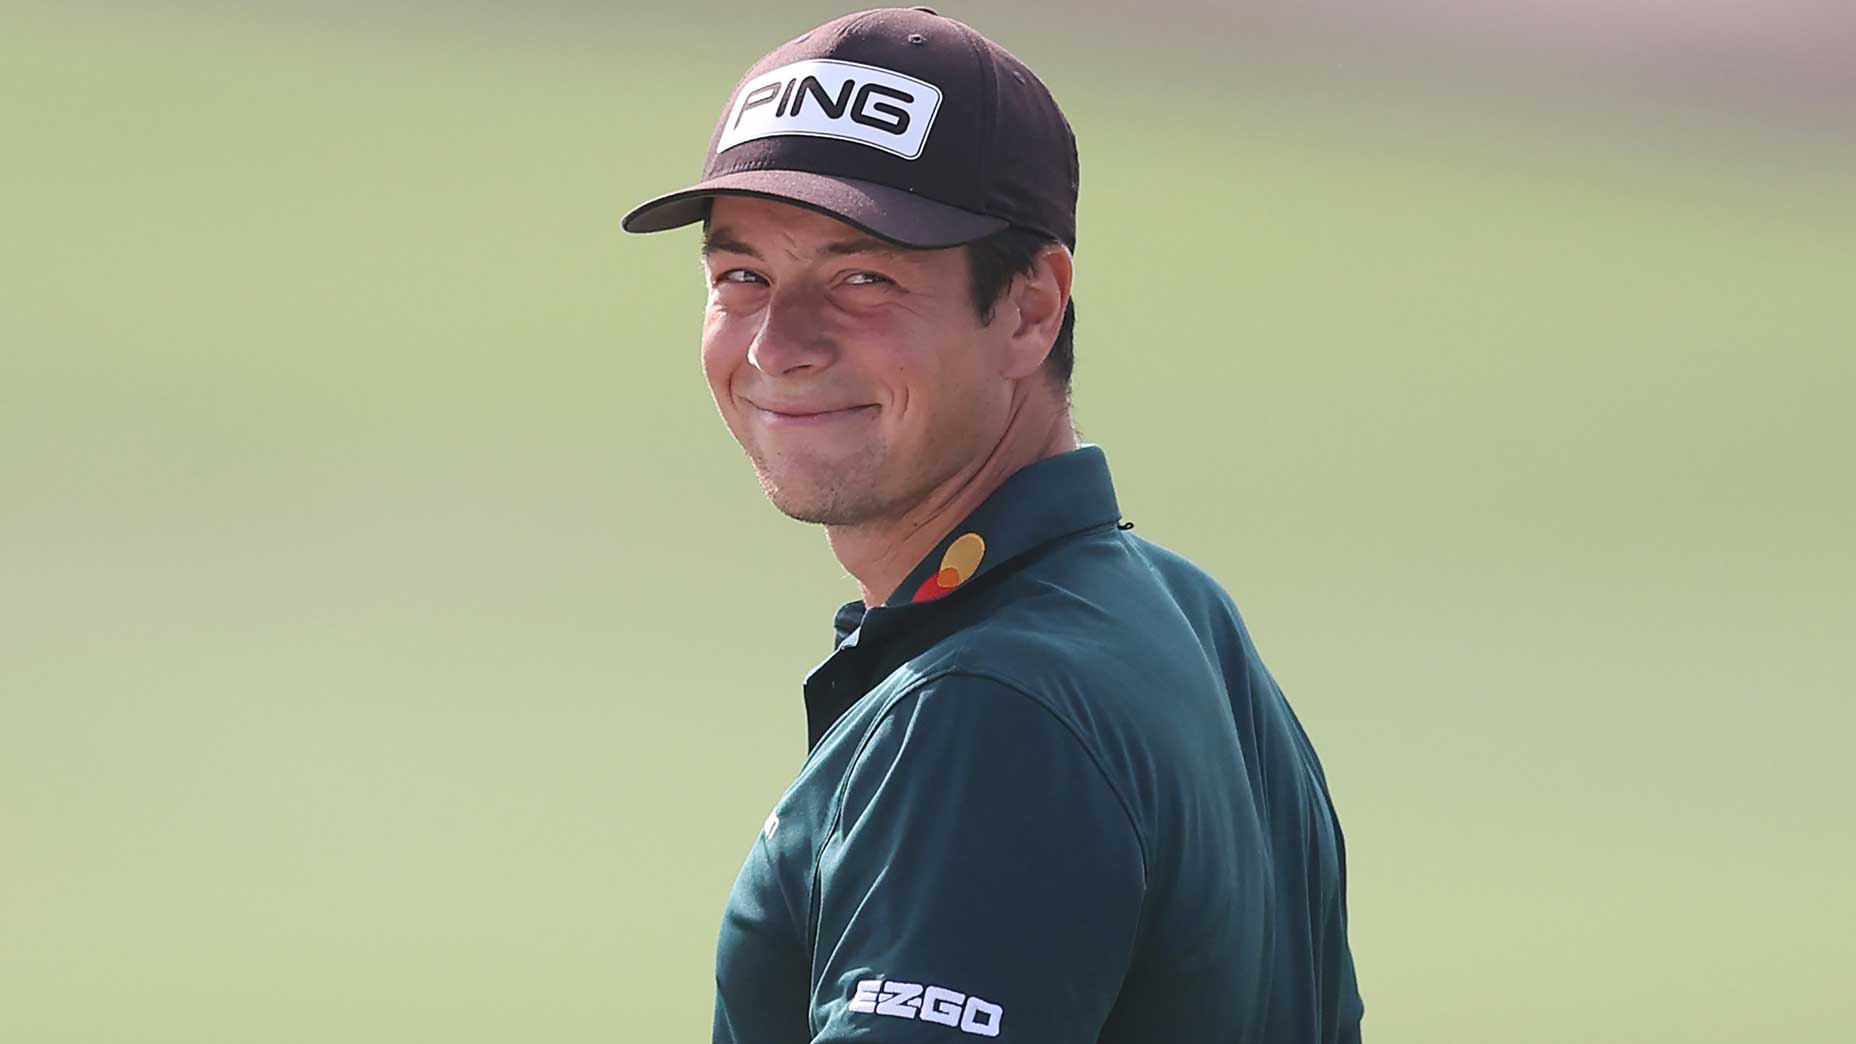 Viktor Hovland is back in action at this week's DP World Tour Championship.